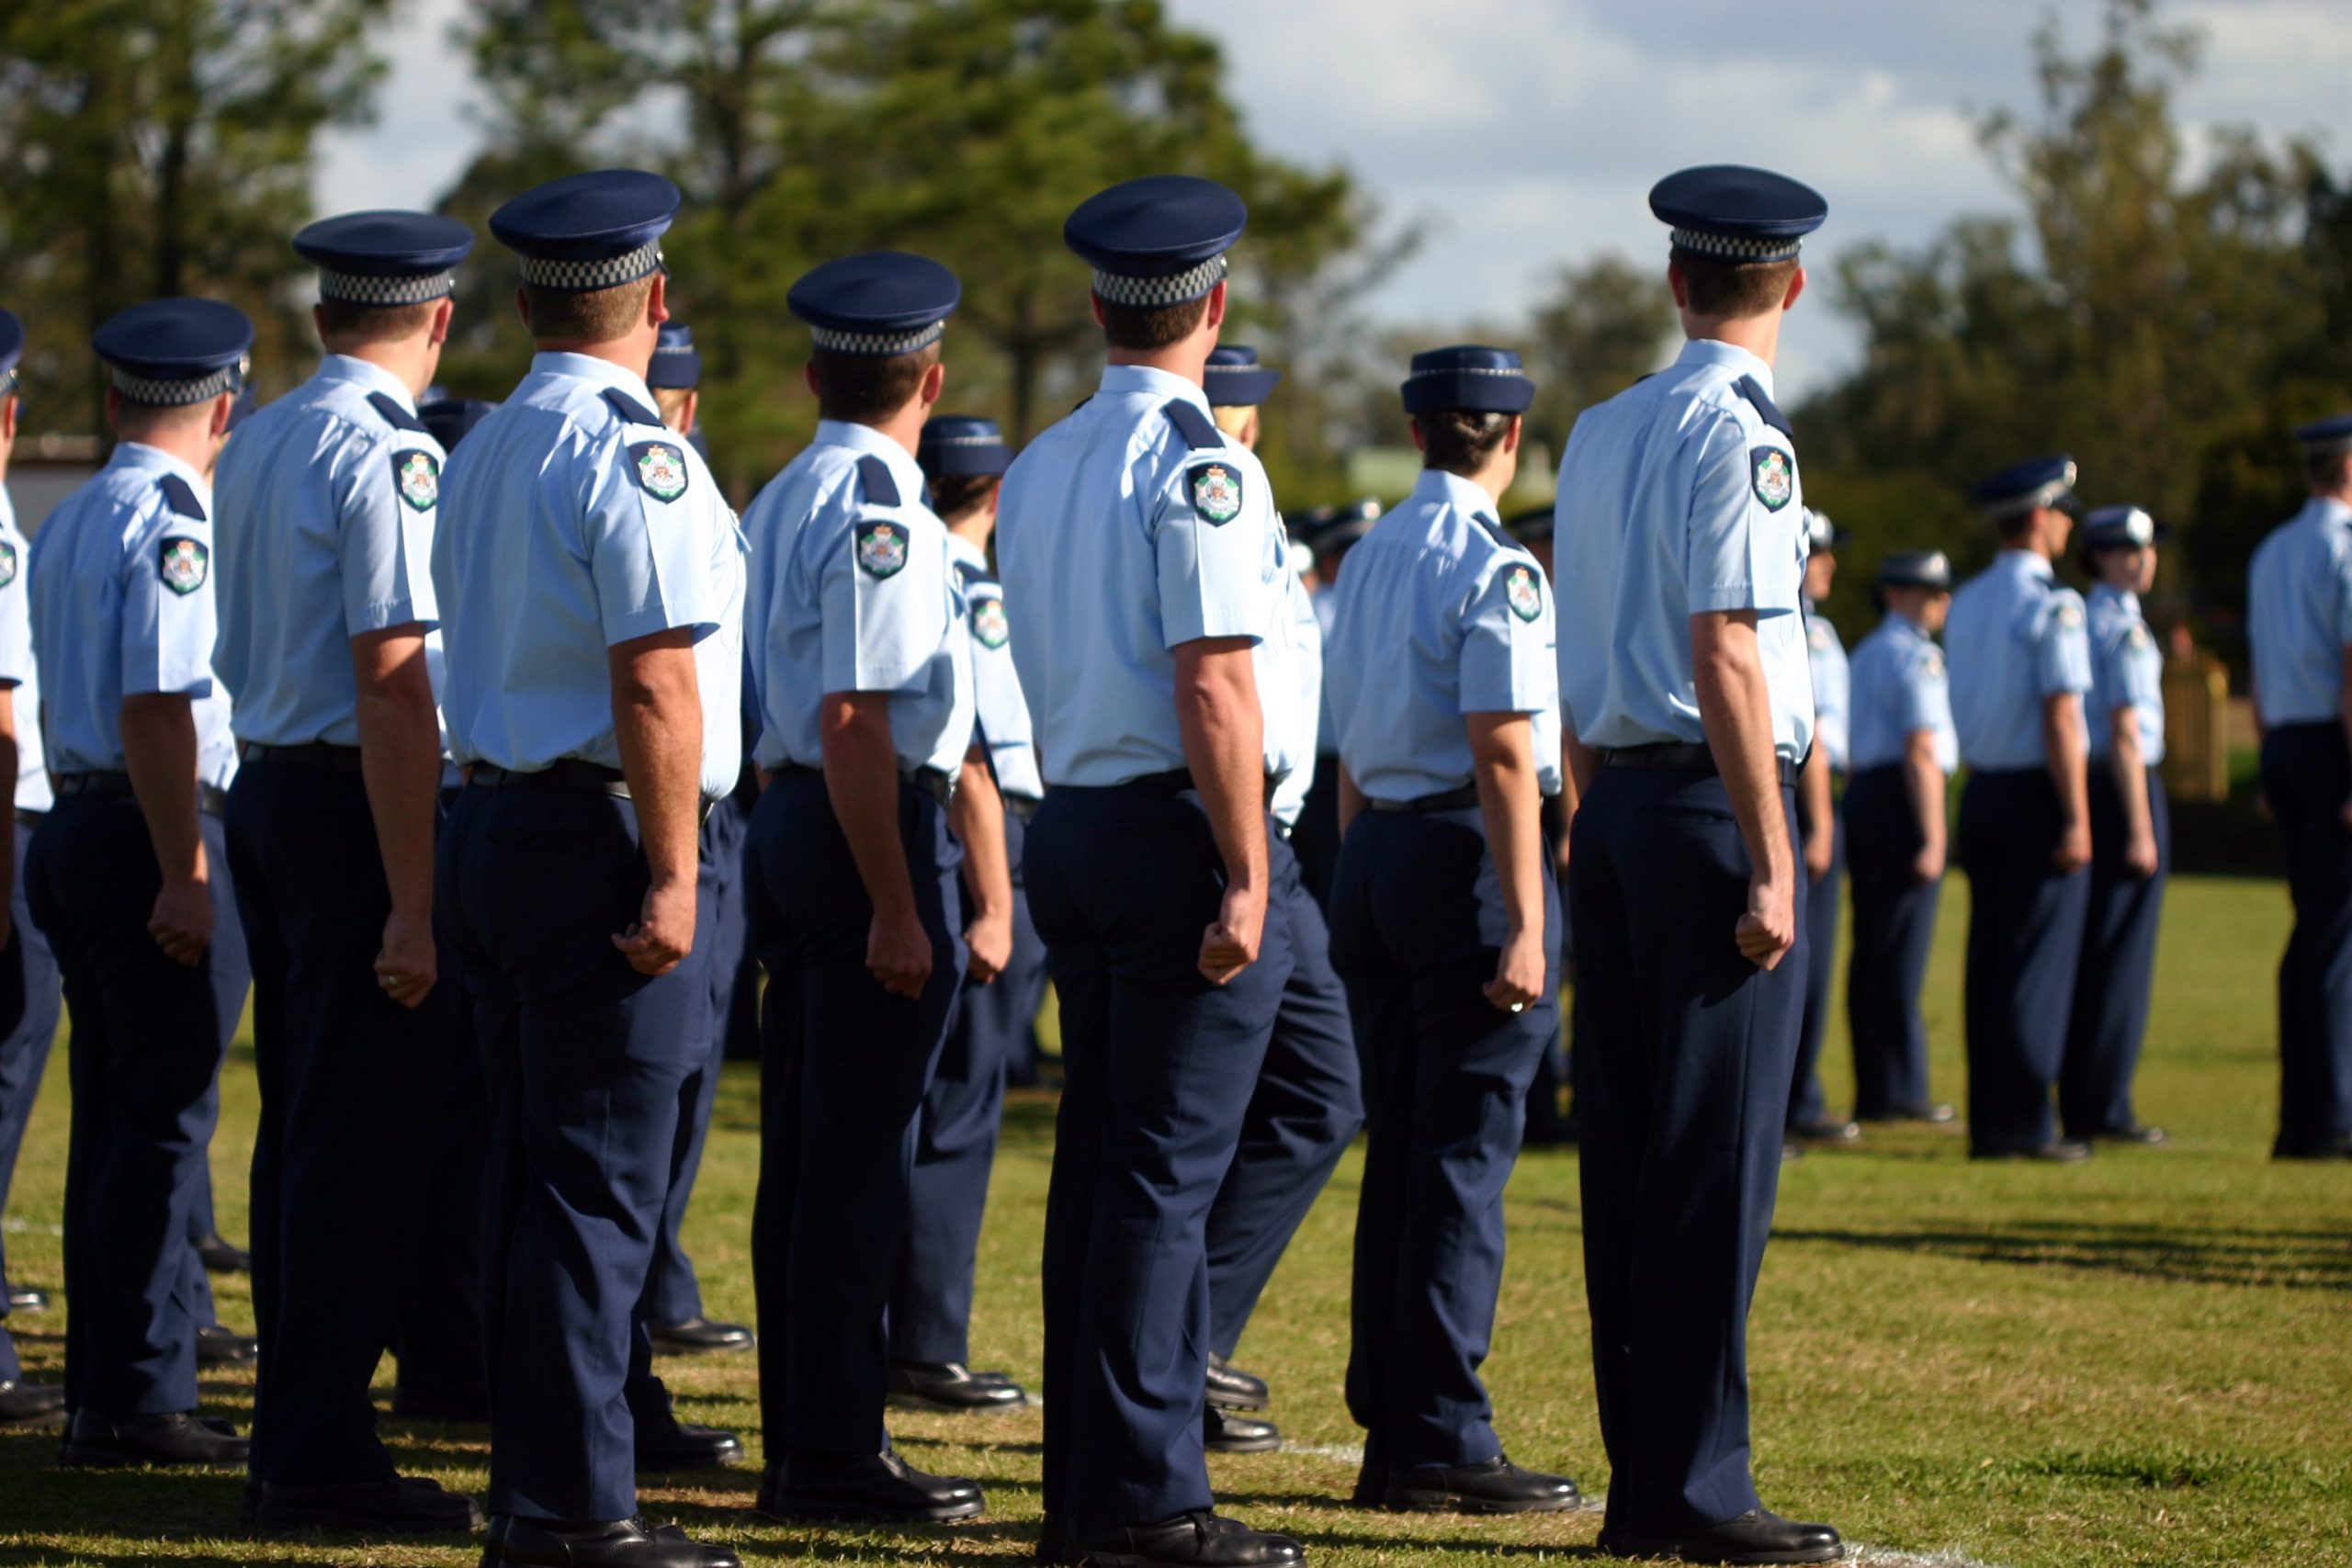 What to Expect on Your First Day at the Police Academy